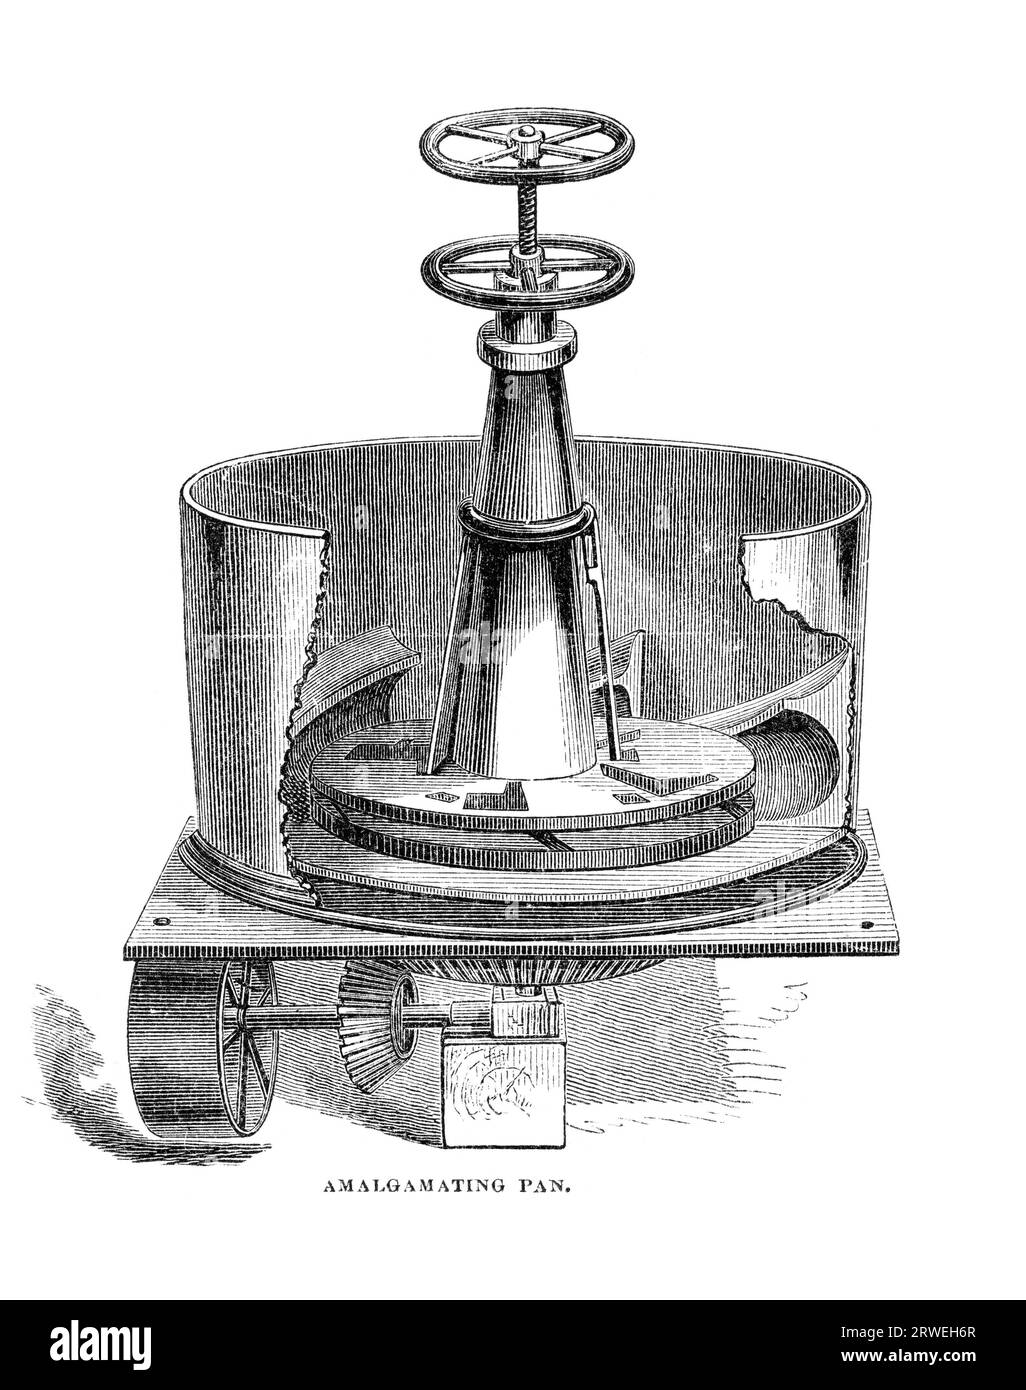 Amalgamating Pan. The Pan amalgamation process is a method to extract silver from ore, using mercury. The process was widely used from 1609 through Stock Photo